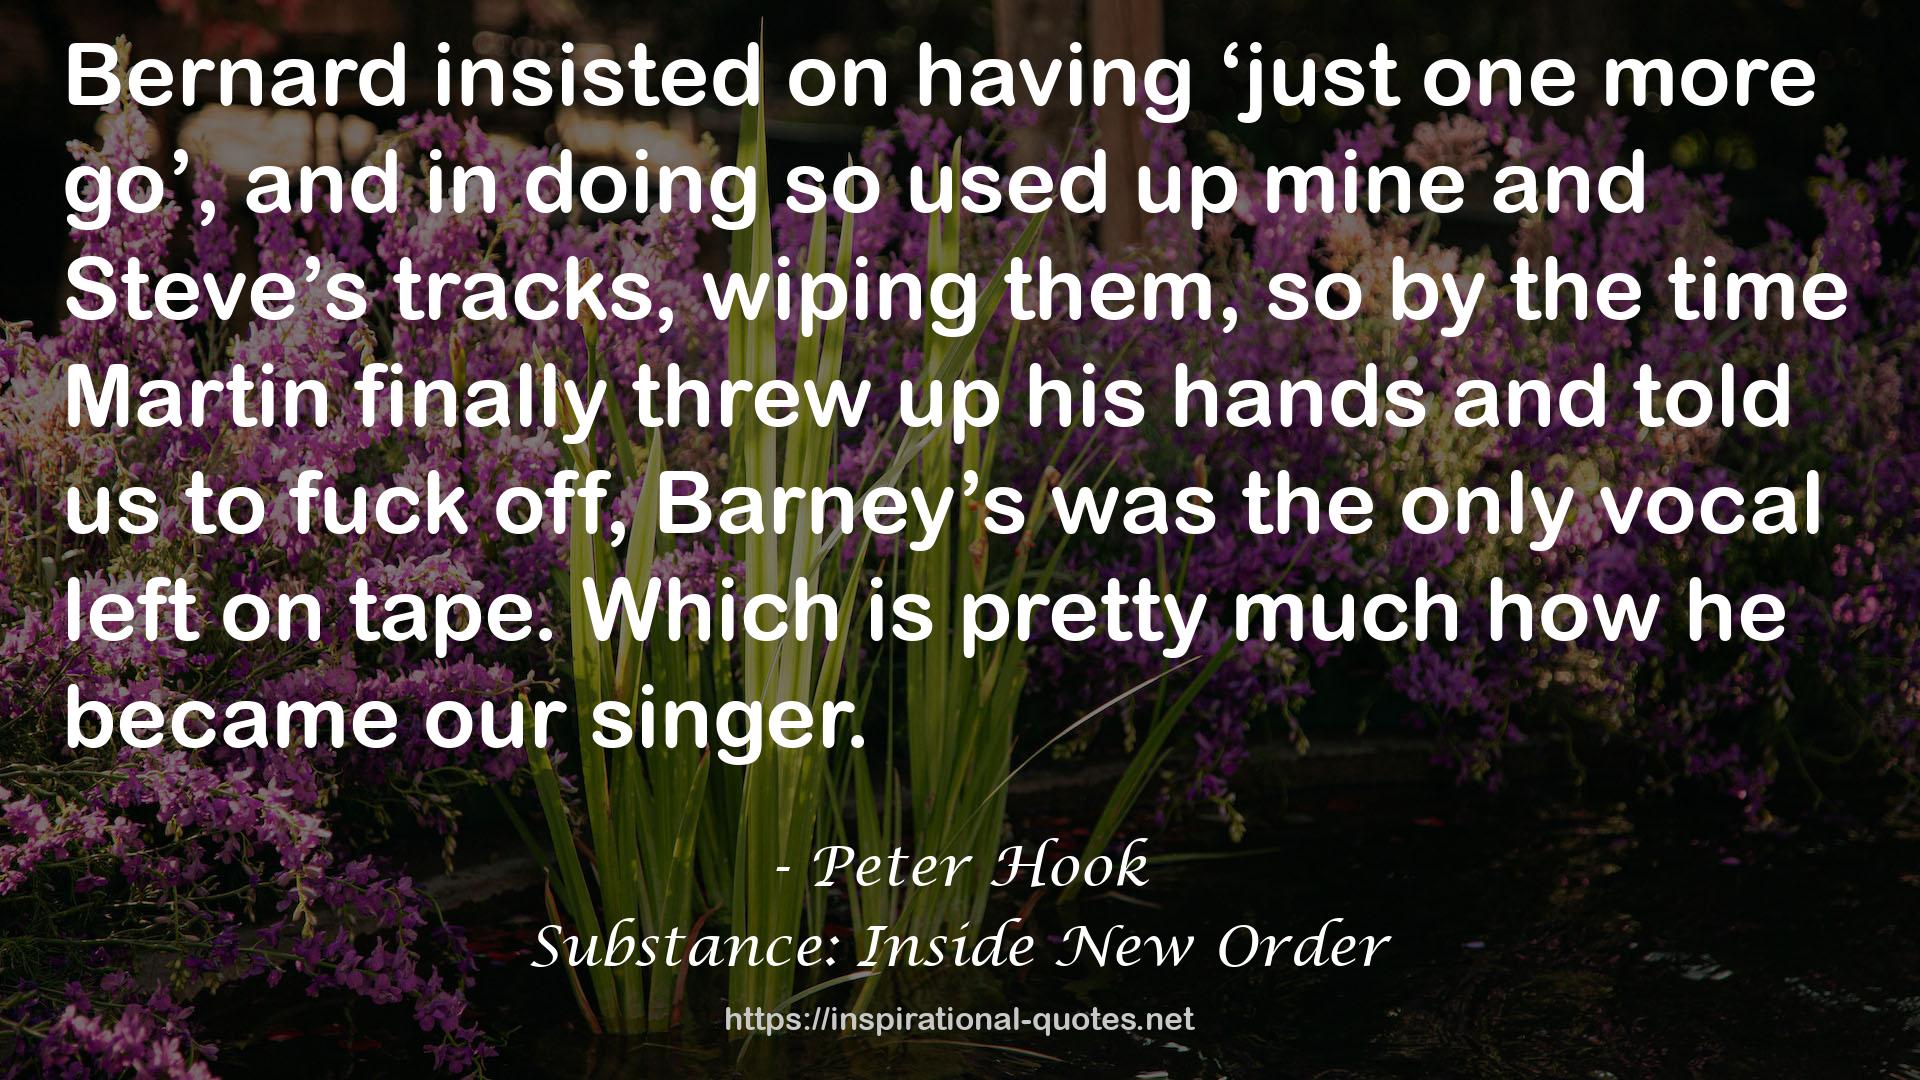 Substance: Inside New Order QUOTES